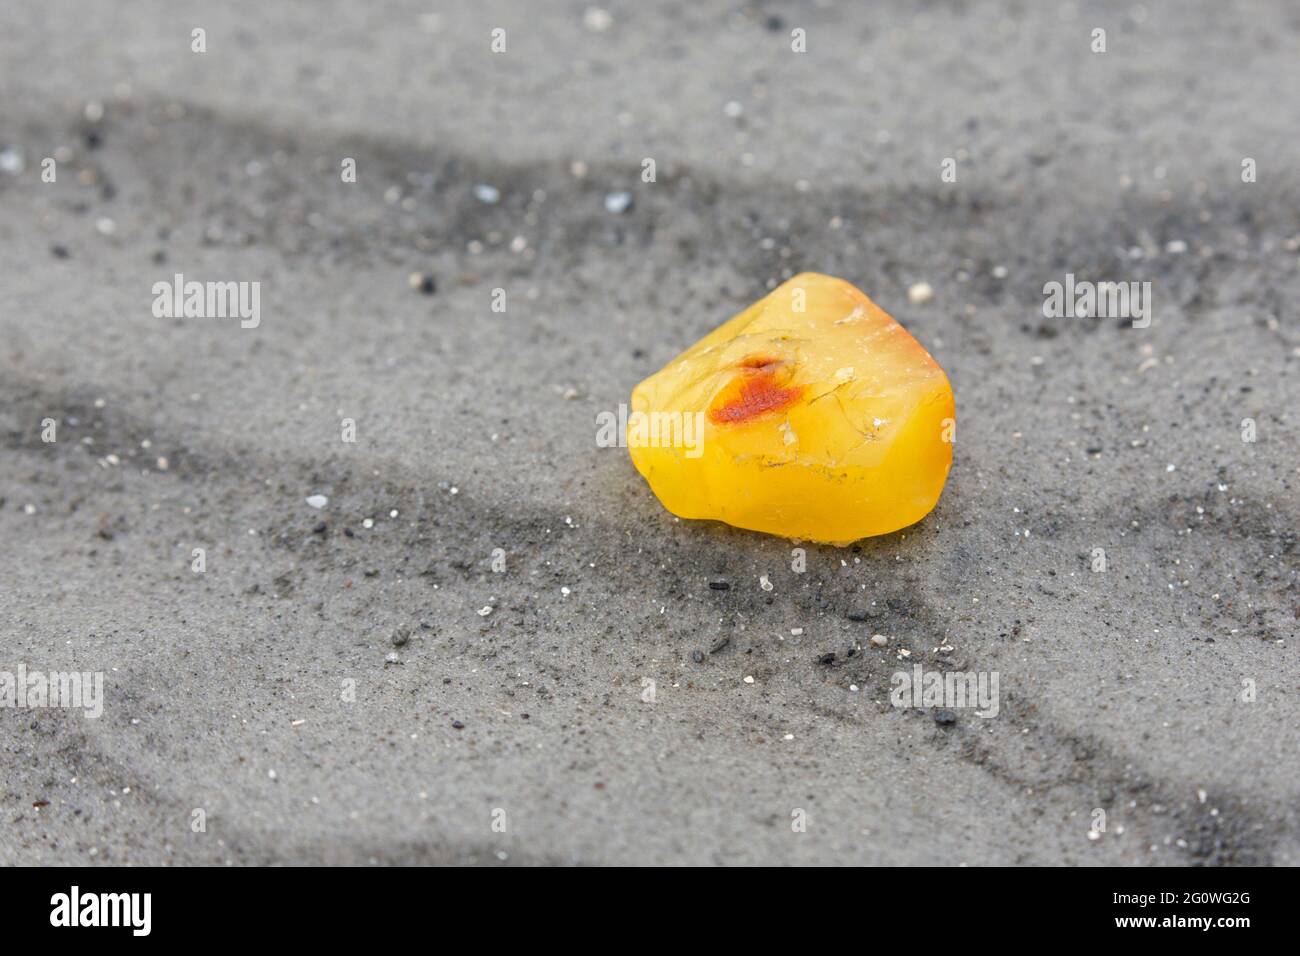 Amber nugget, fossilized tree resin, washed ashore on sandy beach of the Wadden Sea / North Sea, Germany Stock Photo